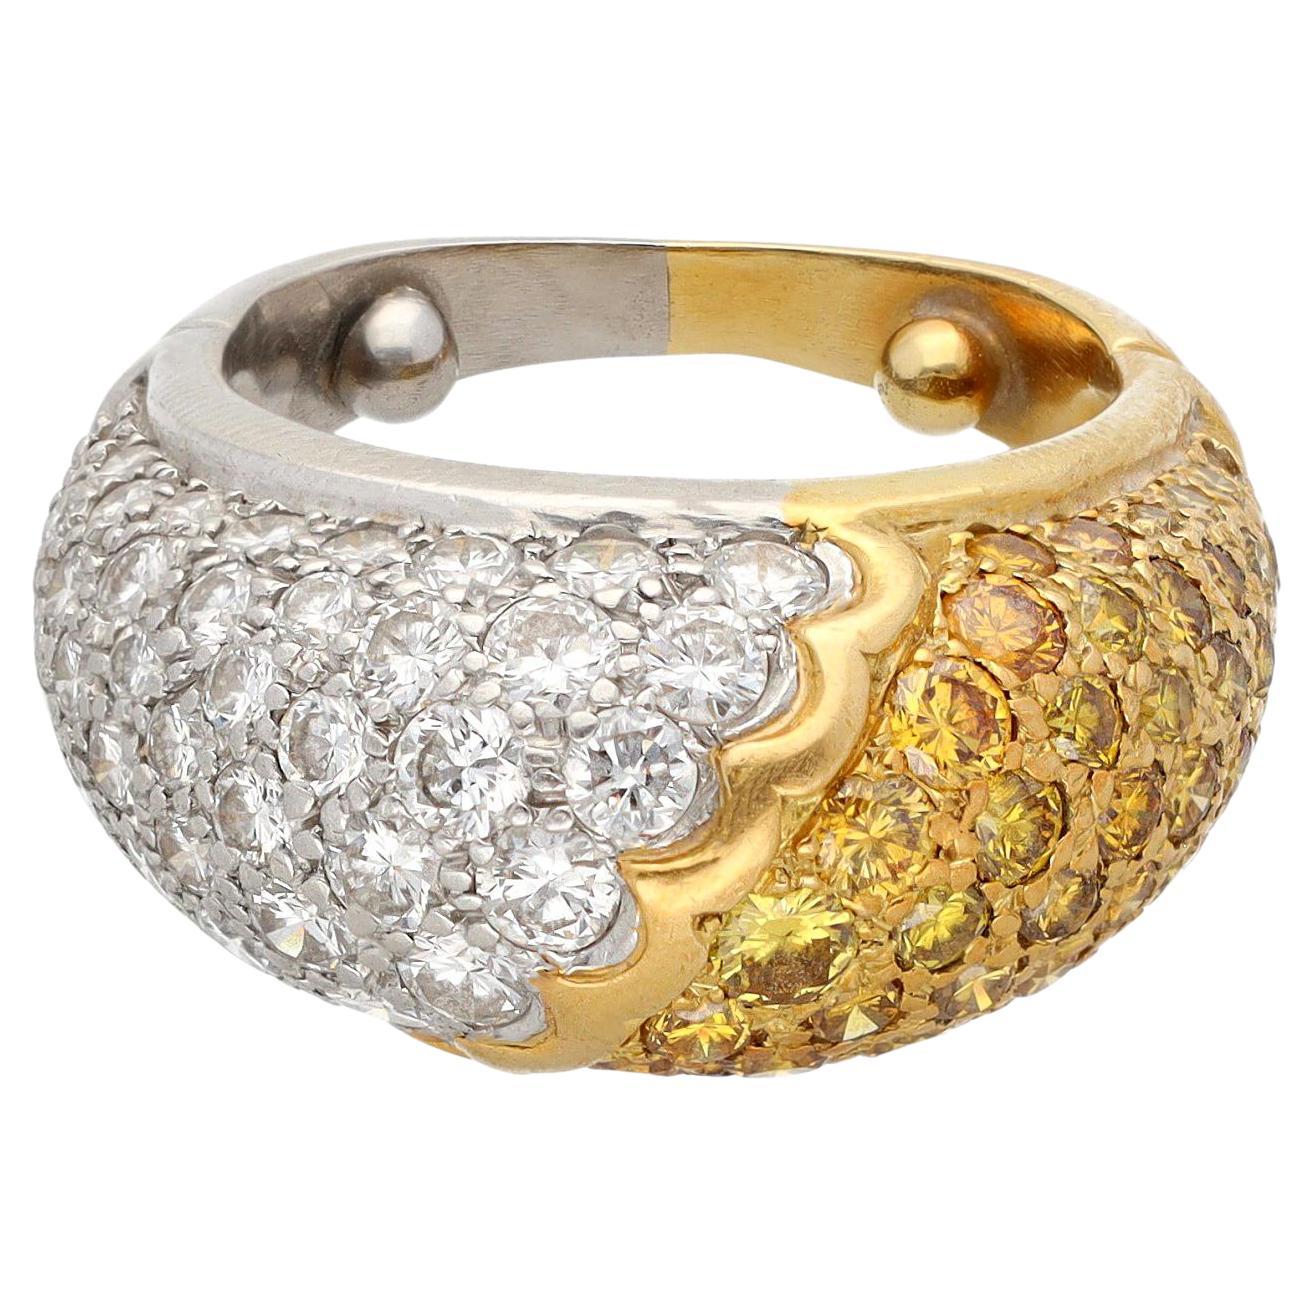 Van Cleef & Arpels Fancy Yellow and White Pave Diamond Bombe Ring